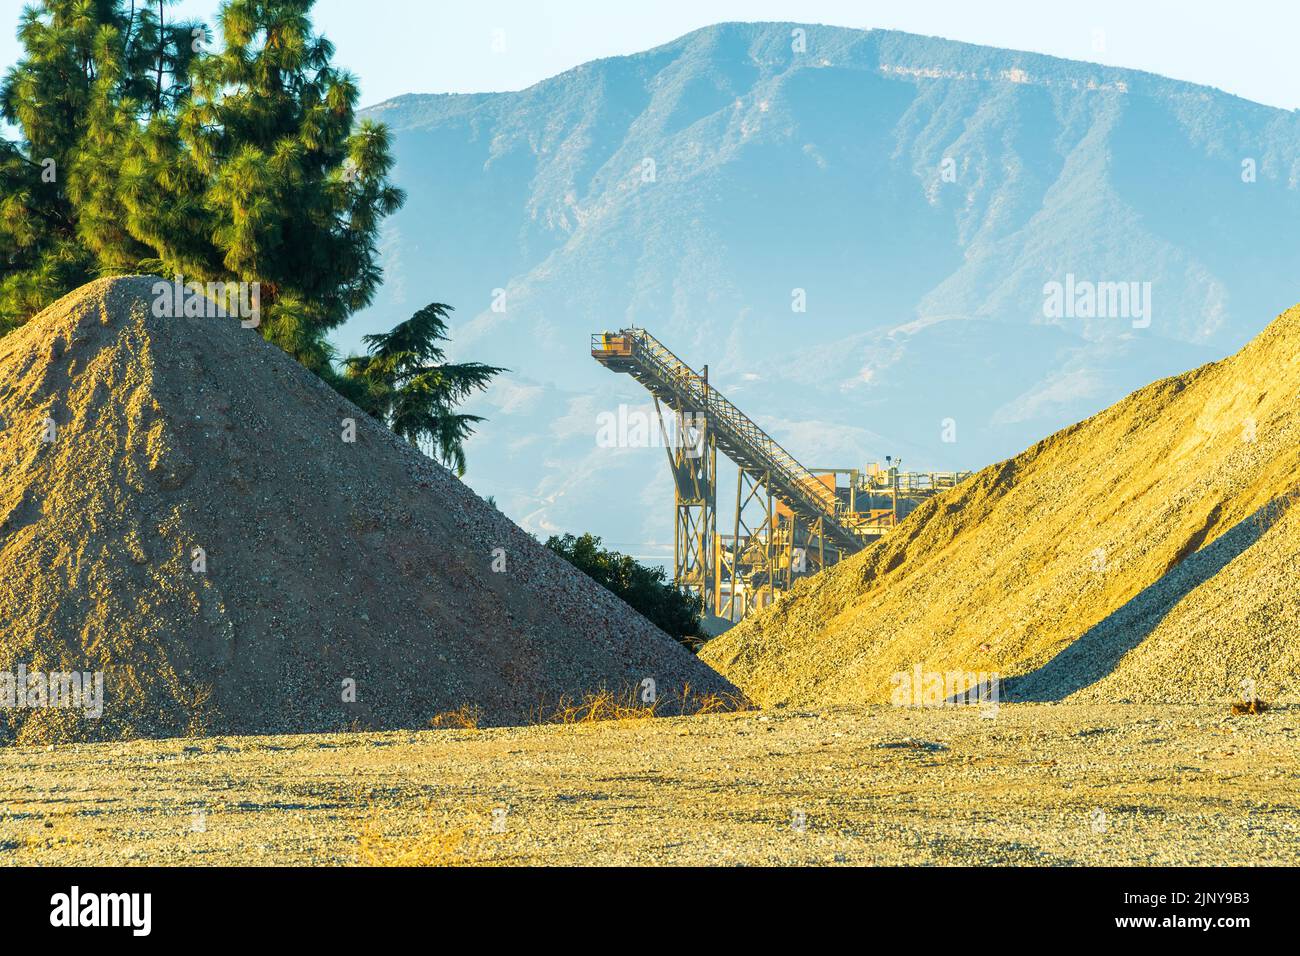 Stone quarry crusher and belt conveyor as seen between piles of stone aggregate. Stock Photo